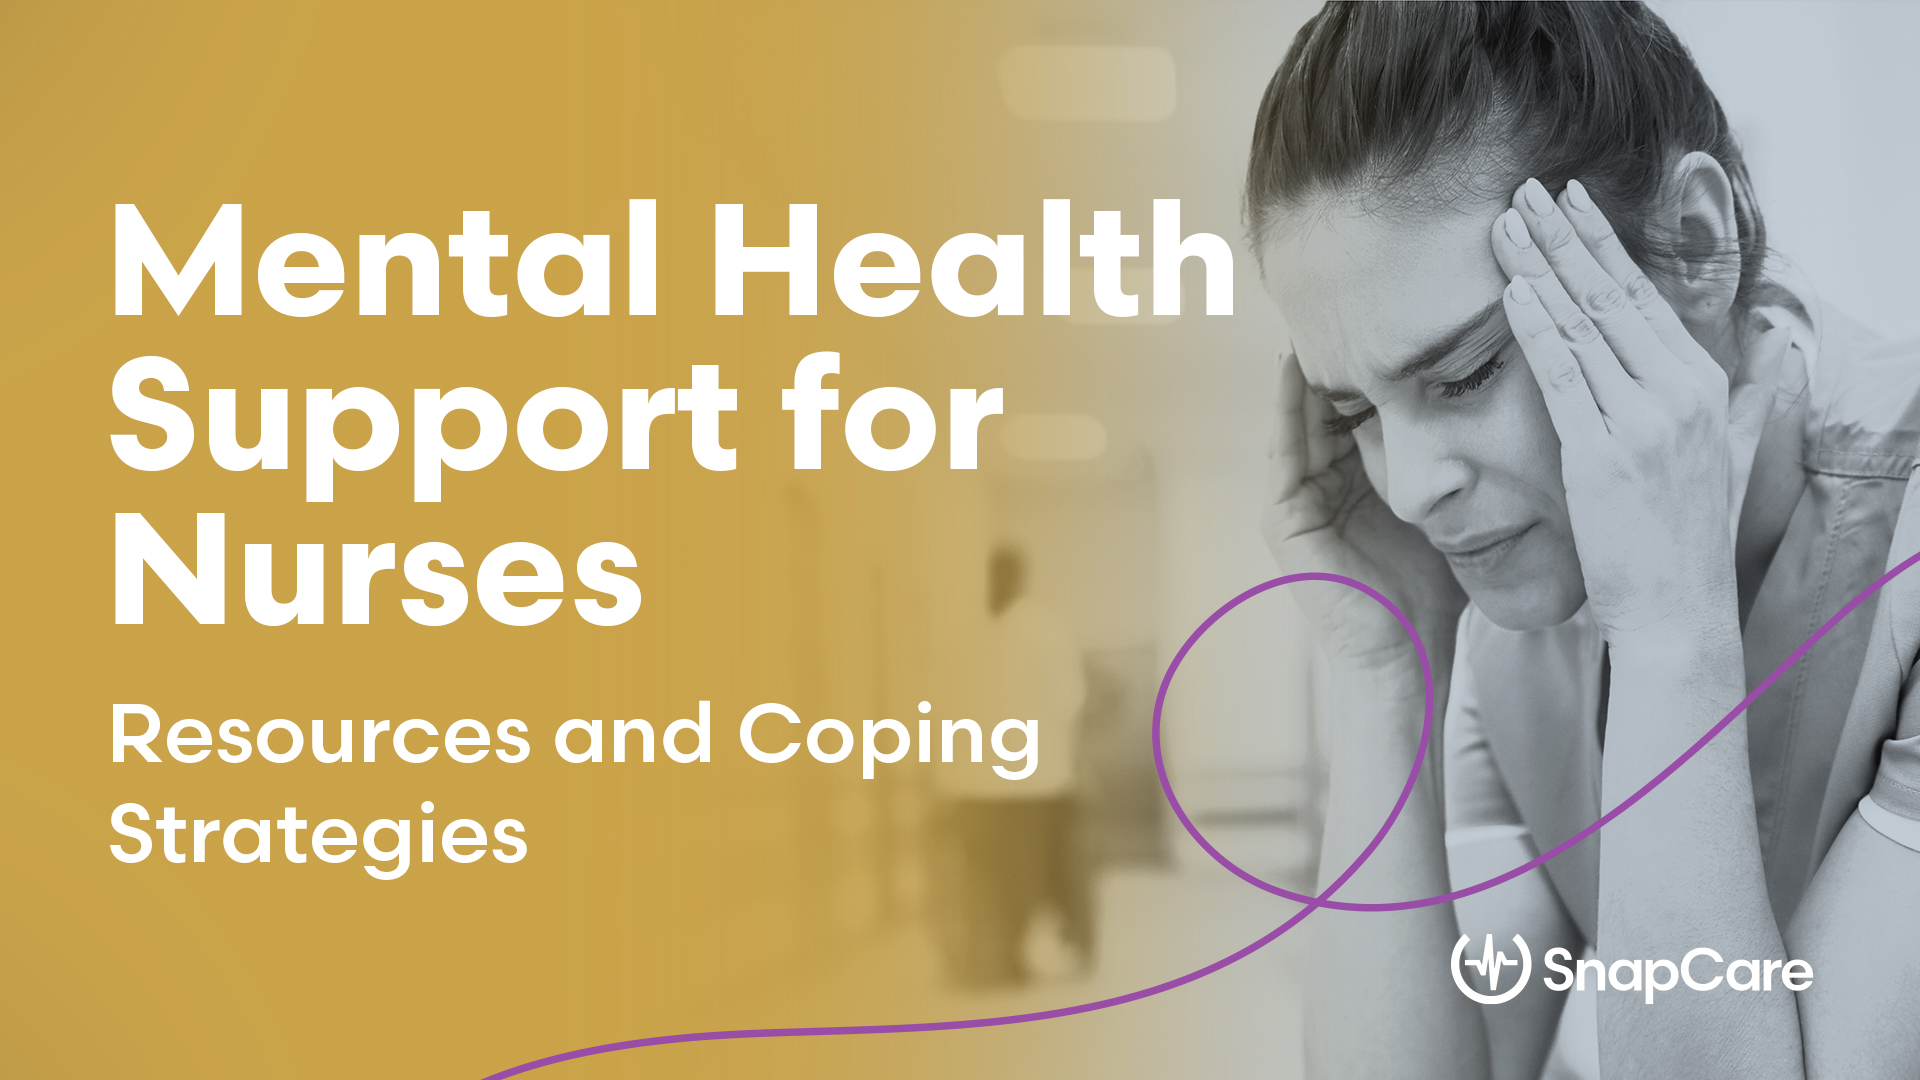 mental health support for nurses: resources and coping strategies